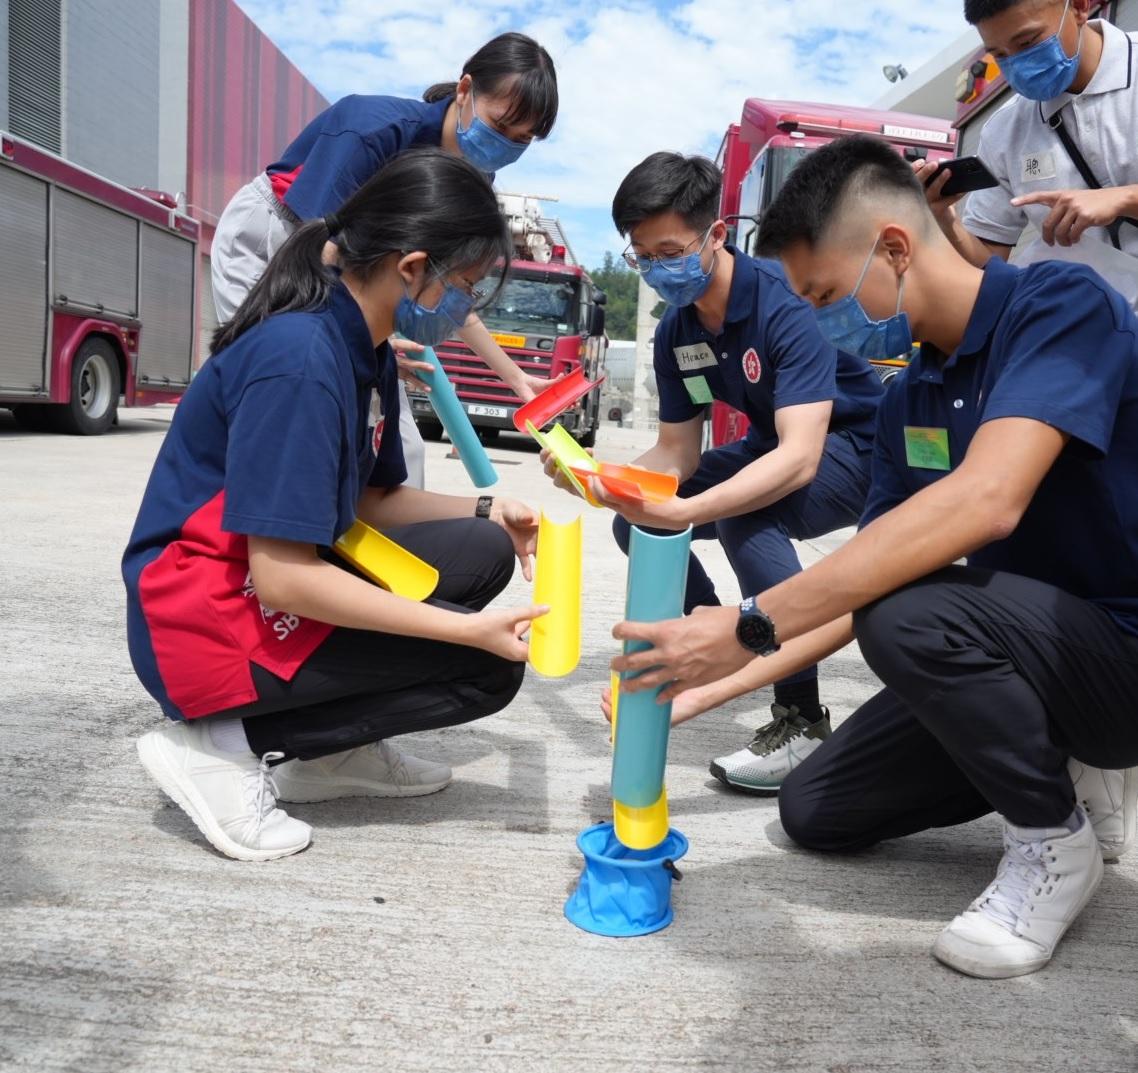 The Security Bureau today (October 22) held a two-day, one-night induction course at the Fire and Ambulance Services Academy in Tseung Kwan O for members of the Security Bureau Youth Uniformed Group Leaders Forum. Photo shows members of the Leaders Forum participating in the team building activity.
